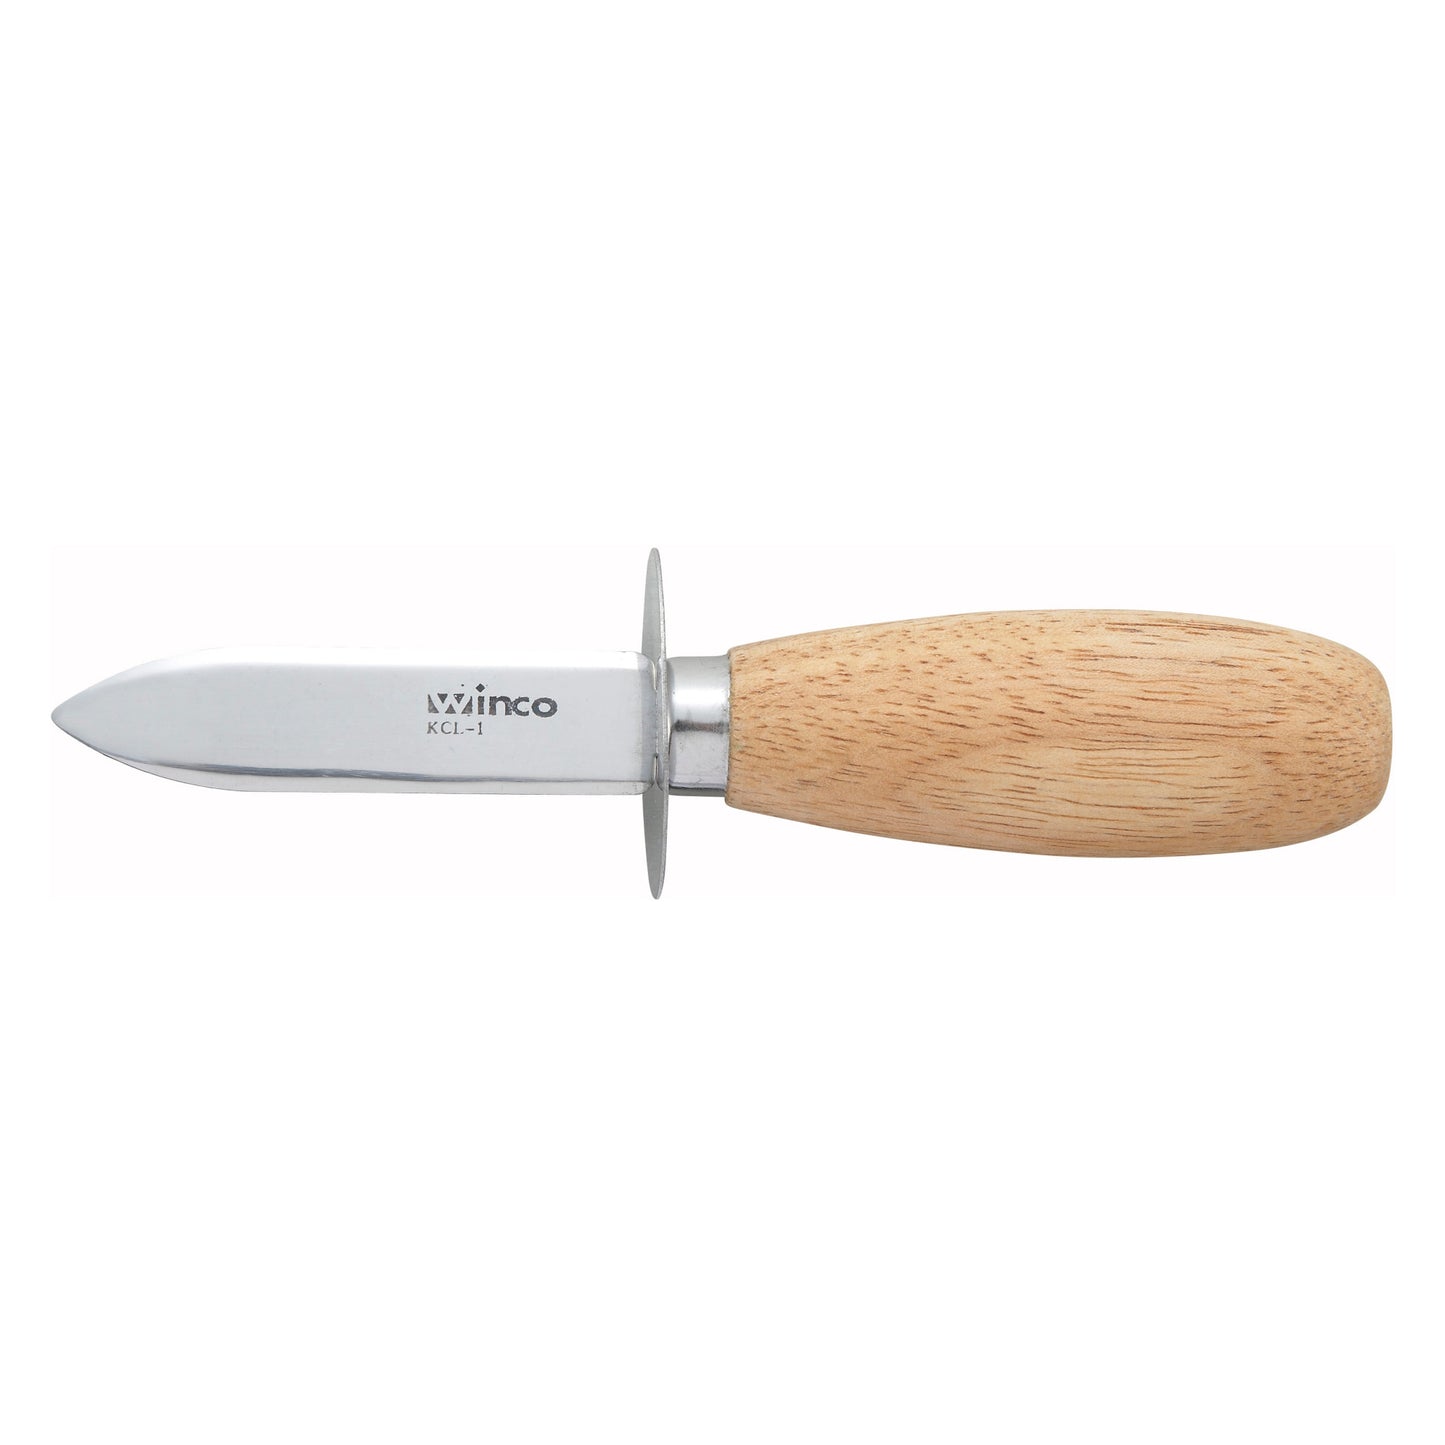 KCL-1 - 2-3/4" Blade Oyster/Clam Knife, Wooden Handle